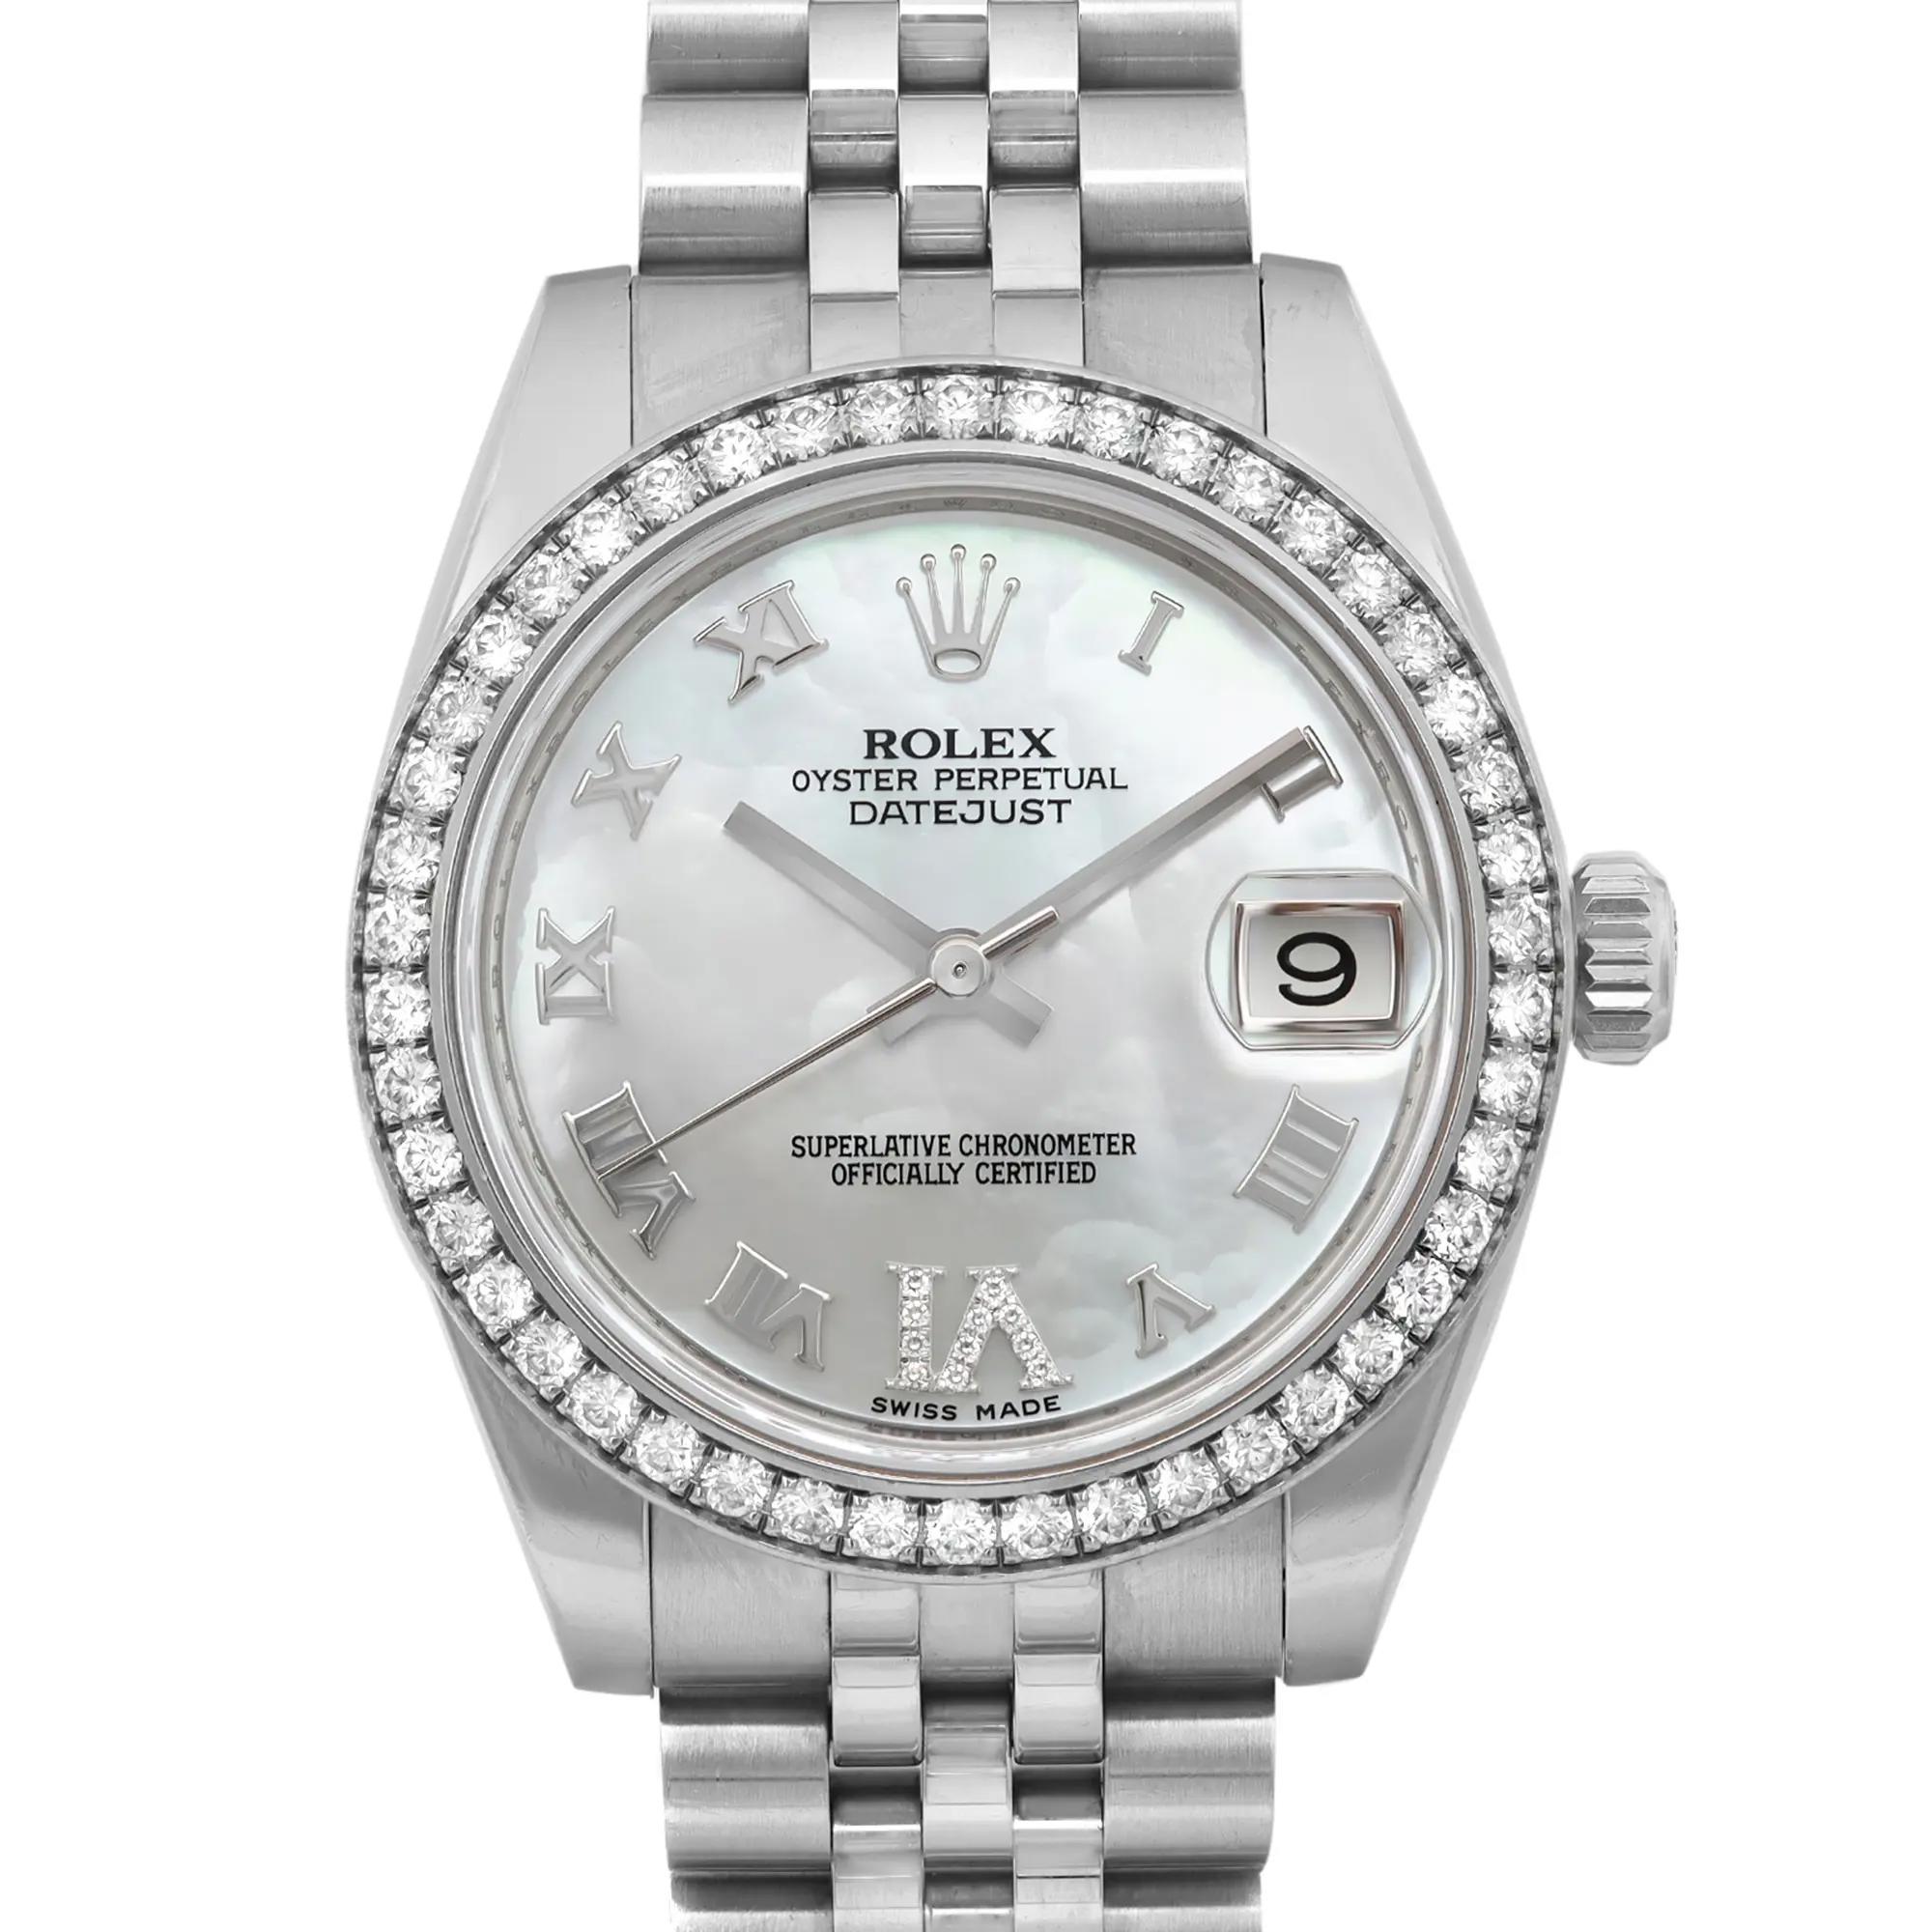 Pre-owned good condition. Factory MOP Dial. Factory diamond bezel. No box and papers.

Brand and Model Information:
Brand: Rolex
Model: Rolex Datejust 178384
Model Number: 178384

Type and Style:
Type: Wristwatch
Style: Luxury
Department: